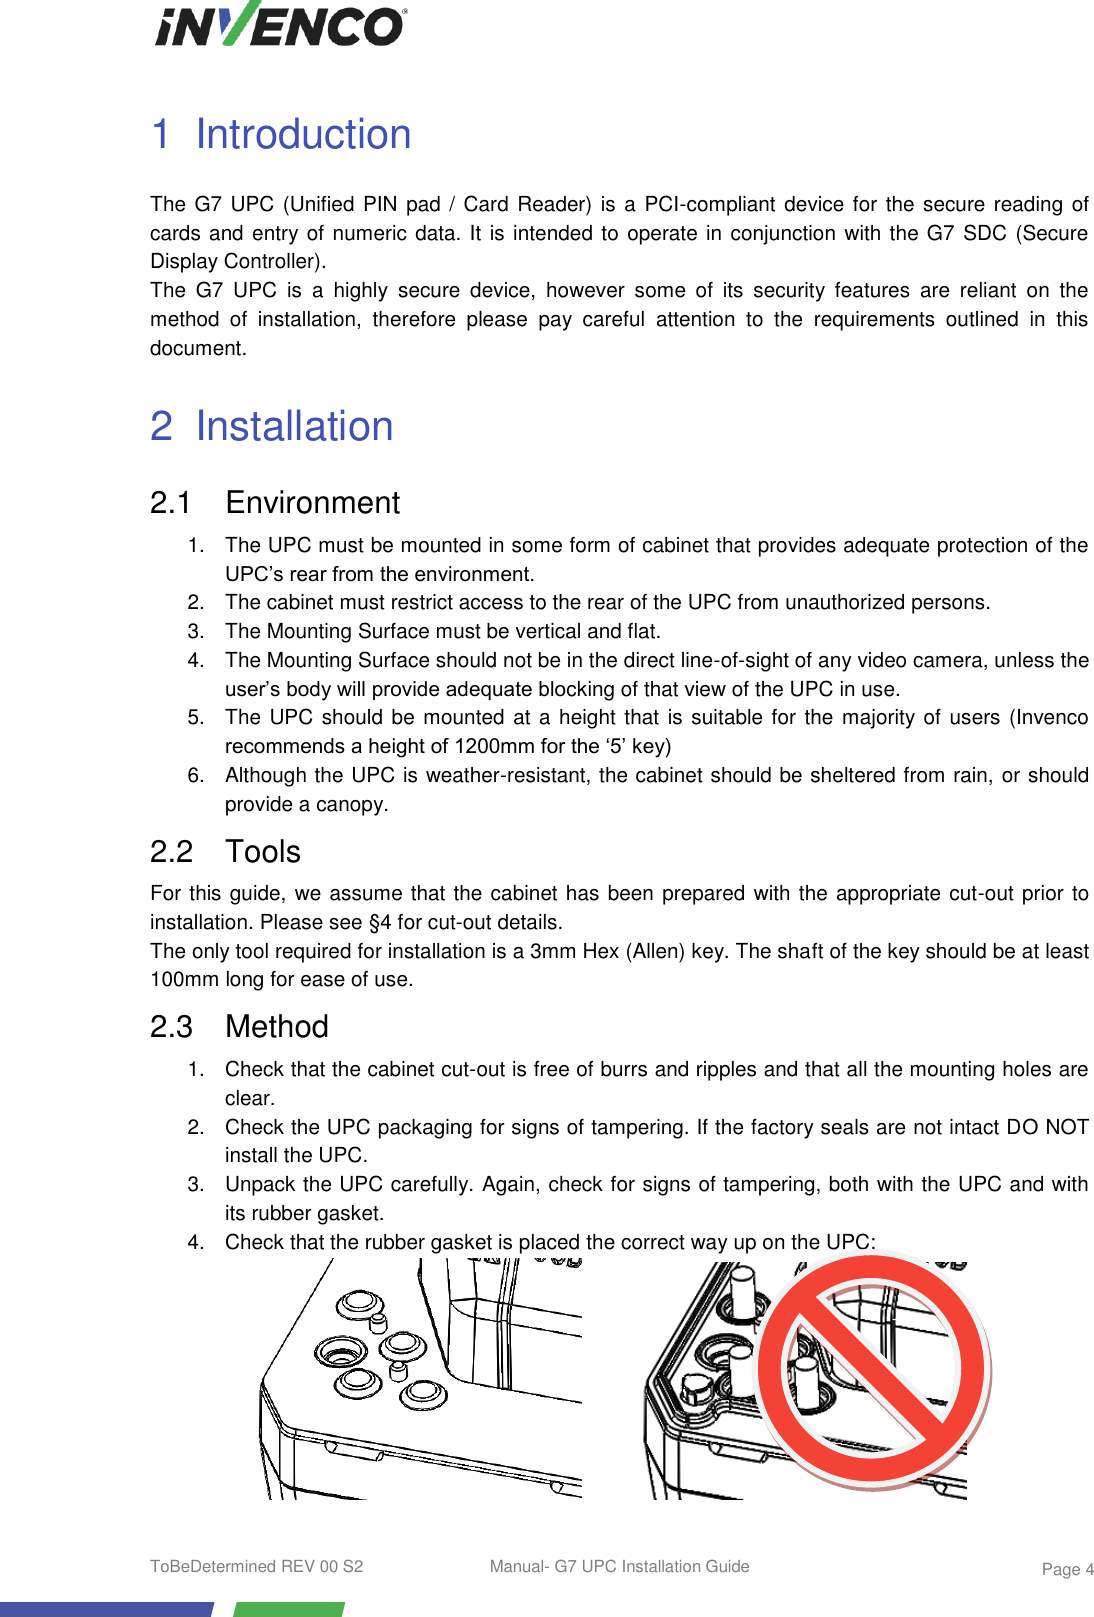  ToBeDetermined REV 00 S2  Manual- G7 UPC Installation Guide    Page 4 1  Introduction The G7 UPC (Unified PIN pad / Card Reader) is a PCI-compliant device for the secure reading of cards and entry of numeric data. It is intended to operate in conjunction with the G7  SDC (Secure Display Controller). The  G7  UPC  is  a  highly  secure  device,  however  some  of  its  security  features  are  reliant  on  the method  of  installation,  therefore  please  pay  careful  attention  to  the  requirements  outlined  in  this document. 2  Installation 2.1  Environment 1.  The UPC must be mounted in some form of cabinet that provides adequate protection of the UPC’s rear from the environment. 2.  The cabinet must restrict access to the rear of the UPC from unauthorized persons. 3.  The Mounting Surface must be vertical and flat. 4.  The Mounting Surface should not be in the direct line-of-sight of any video camera, unless the user’s body will provide adequate blocking of that view of the UPC in use. 5.  The UPC should be mounted at a height that  is suitable for the majority of users (Invenco recommends a height of 1200mm for the ‘5’ key) 6.  Although the UPC is weather-resistant, the cabinet should be sheltered from rain, or should provide a canopy. 2.2  Tools For this guide, we assume that the cabinet has been prepared with the appropriate cut-out prior to installation. Please see §4 for cut-out details. The only tool required for installation is a 3mm Hex (Allen) key. The shaft of the key should be at least 100mm long for ease of use. 2.3  Method 1.  Check that the cabinet cut-out is free of burrs and ripples and that all the mounting holes are clear. 2.  Check the UPC packaging for signs of tampering. If the factory seals are not intact DO NOT install the UPC. 3.  Unpack the UPC carefully. Again, check for signs of tampering, both with the UPC and with its rubber gasket. 4.  Check that the rubber gasket is placed the correct way up on the UPC:          